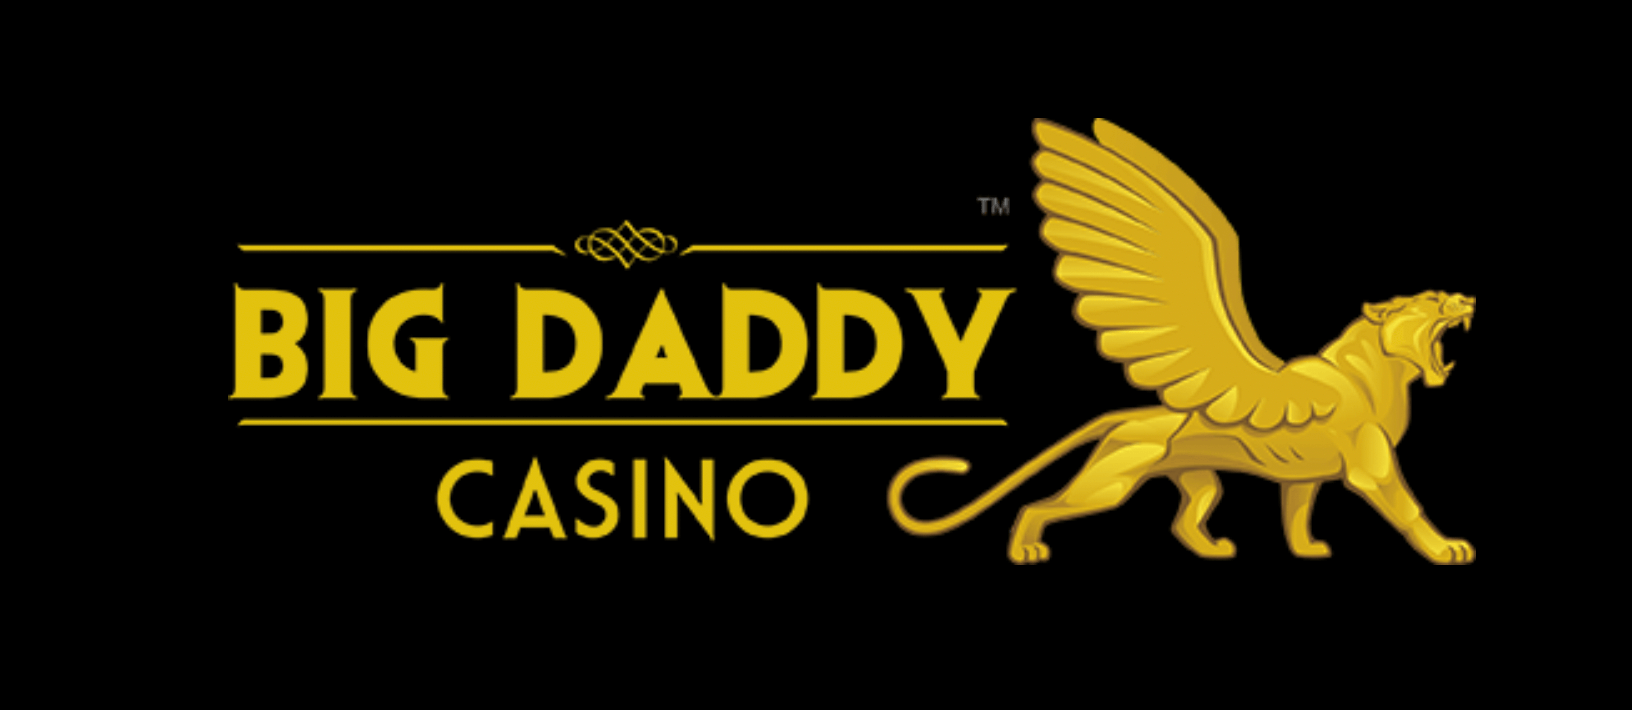 Big Daddy Casino Rejects Any Affiliations With Arrested Kumar